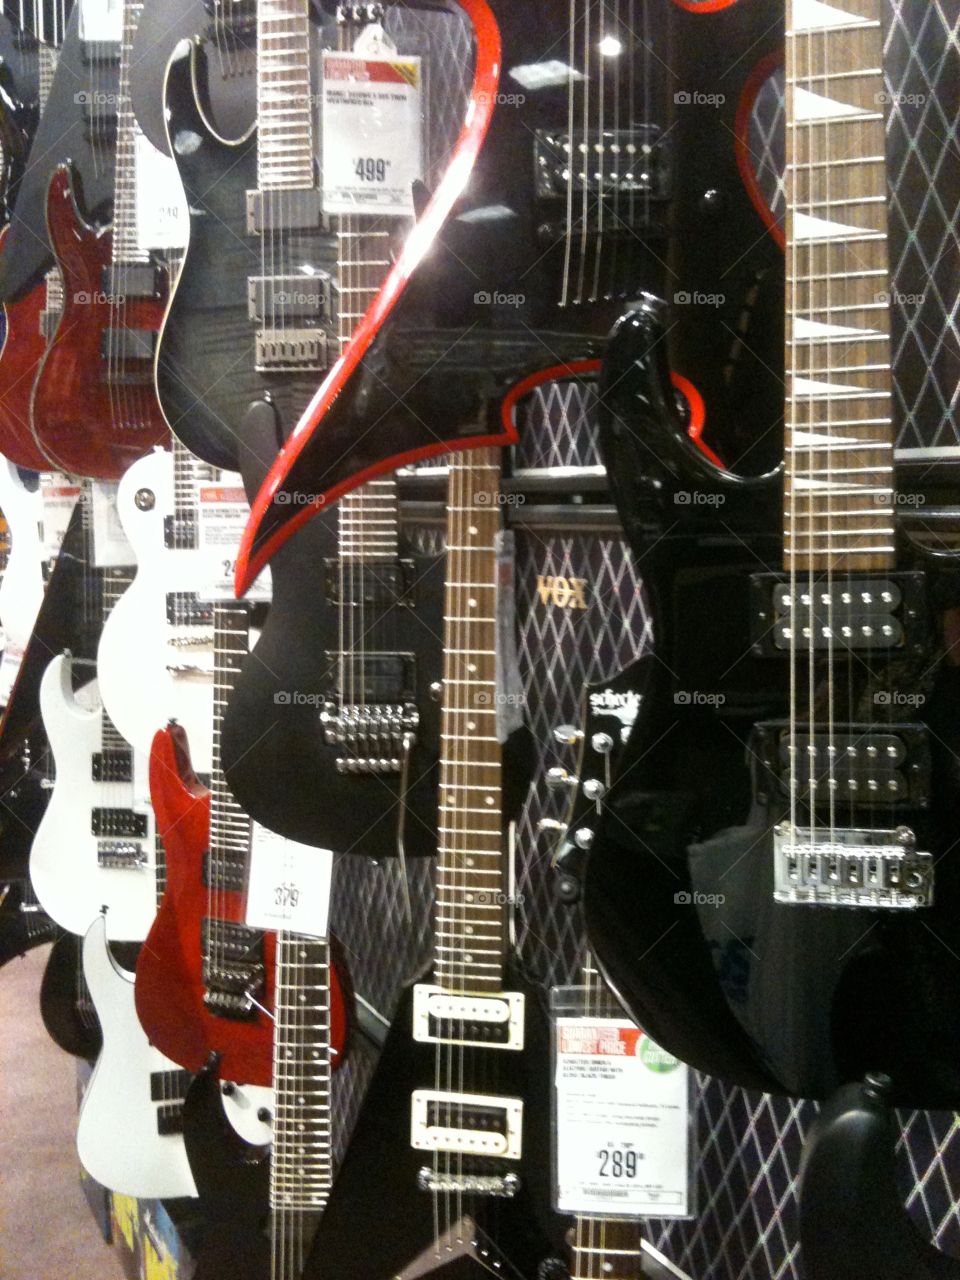 Music store. Guitars for sale